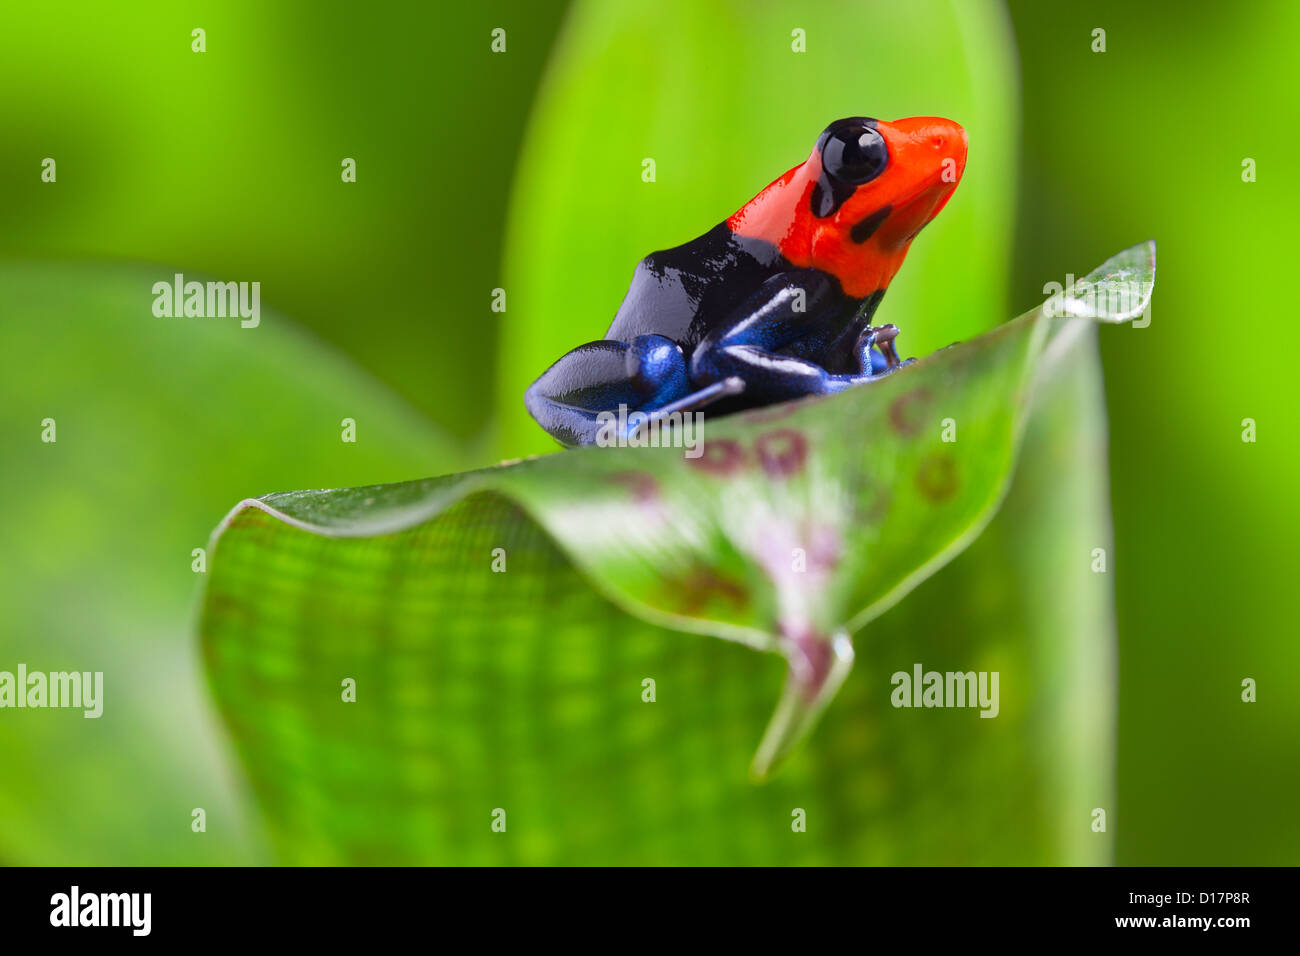 Peru Amazon frog in tropical rainforest small poison dart frog with red head Stock Photo